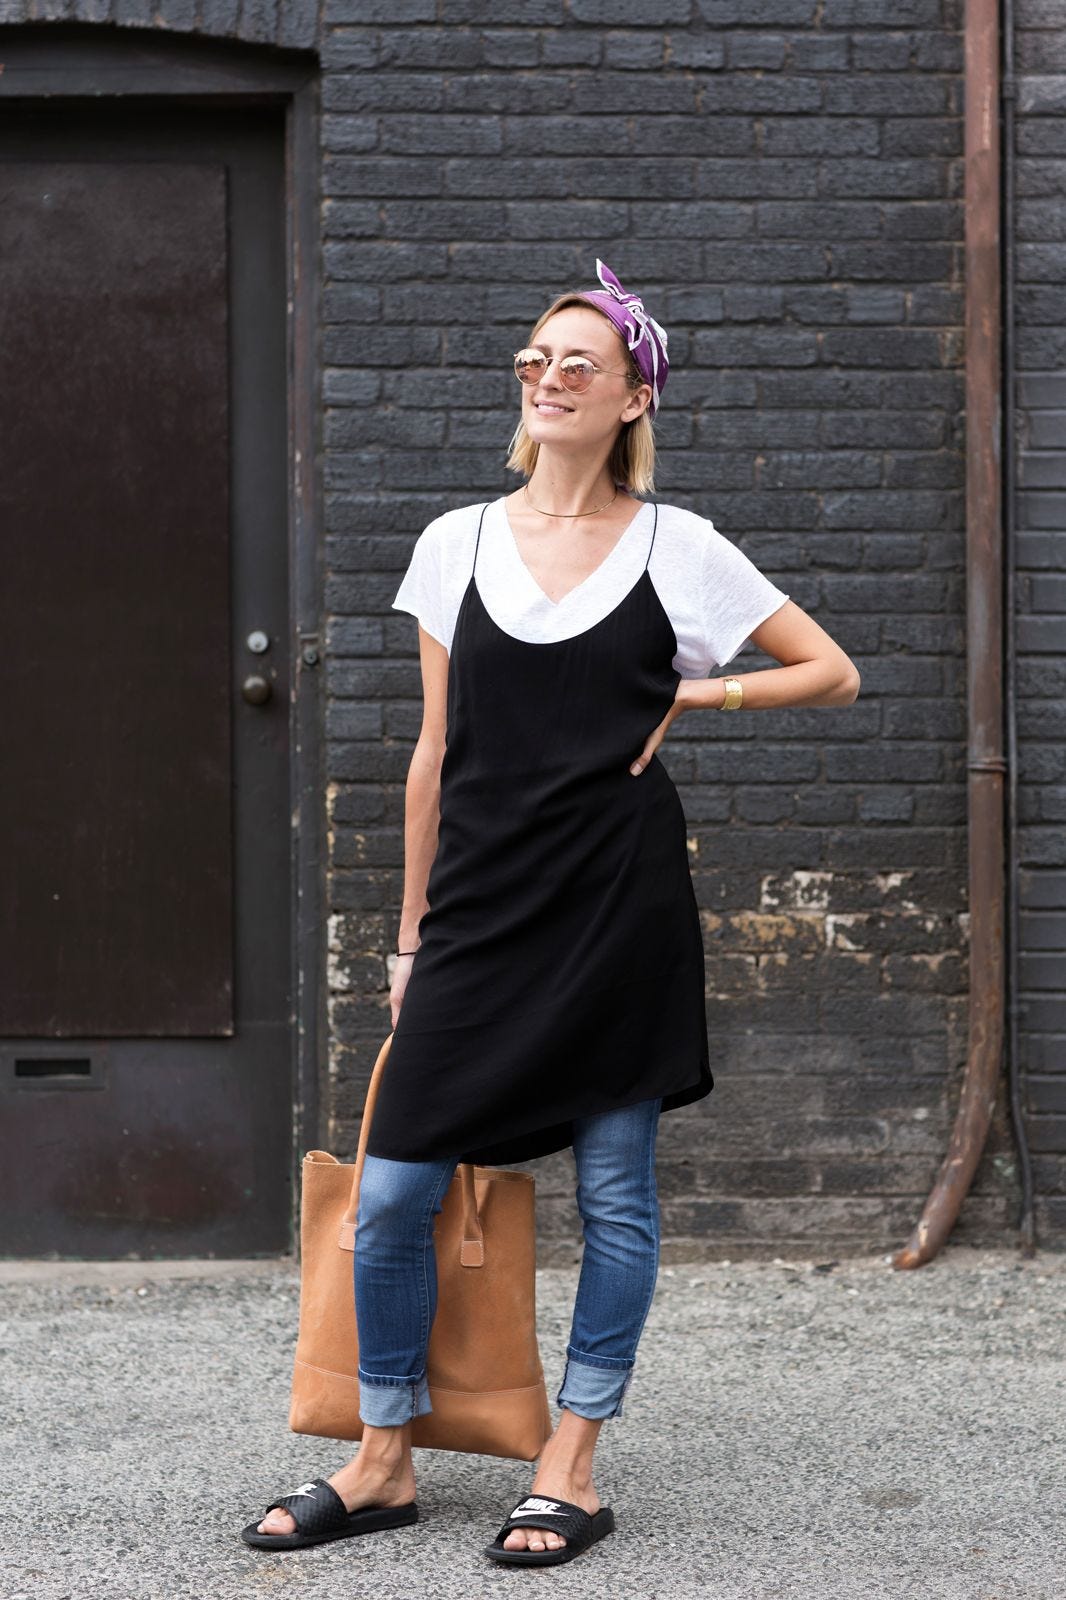 How To Wear The Cami Dress Without Looking Like You Are Going To Bed